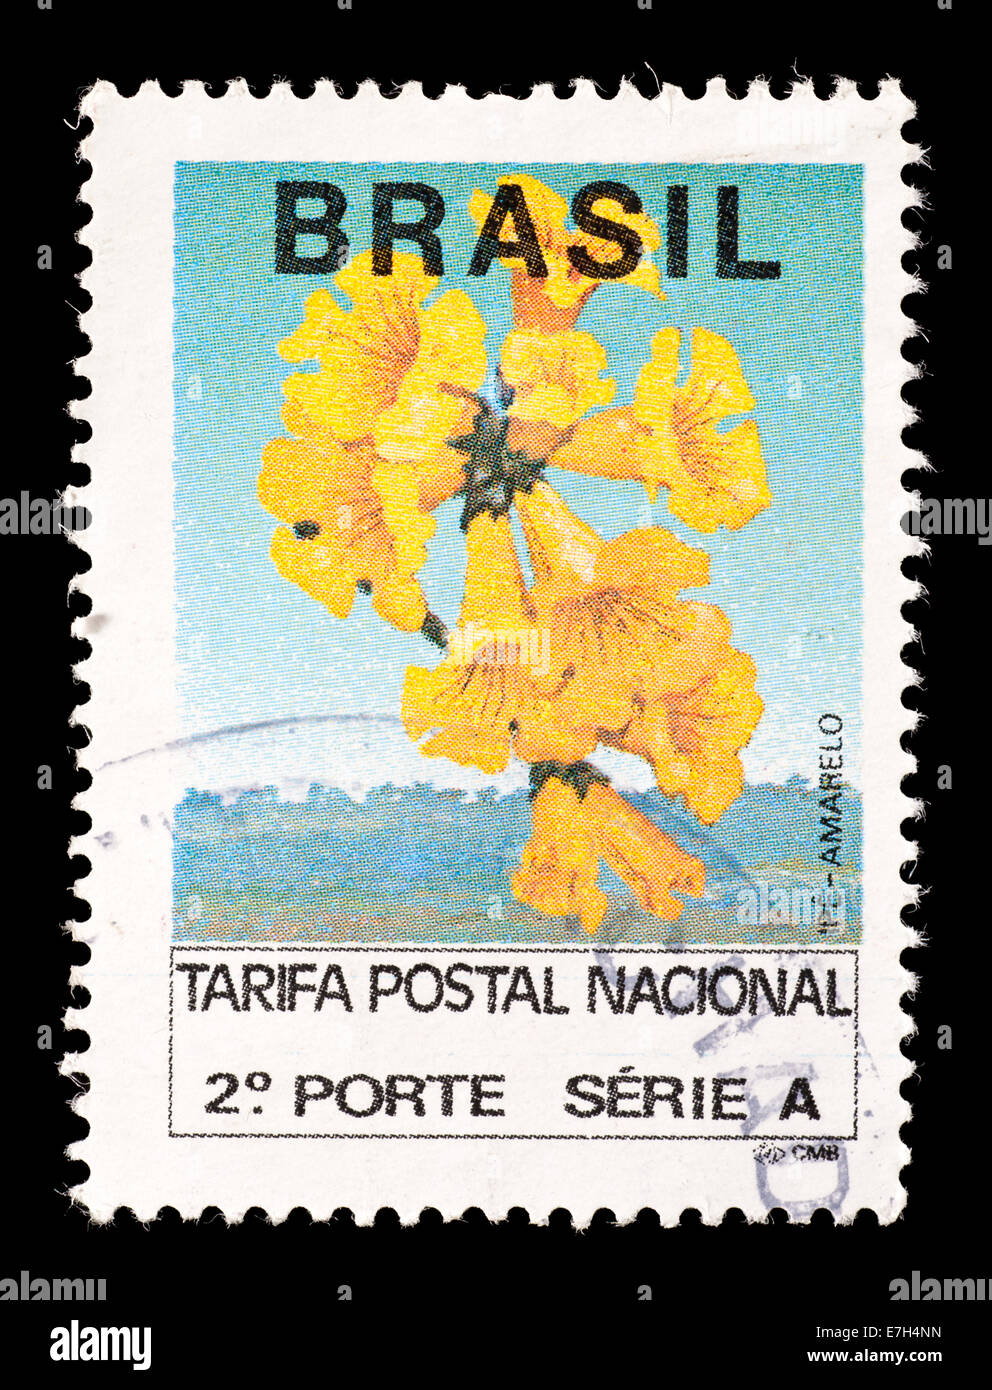 Postage stamp from Brazil depicting yellow amaryllis flowers. Stock Photo